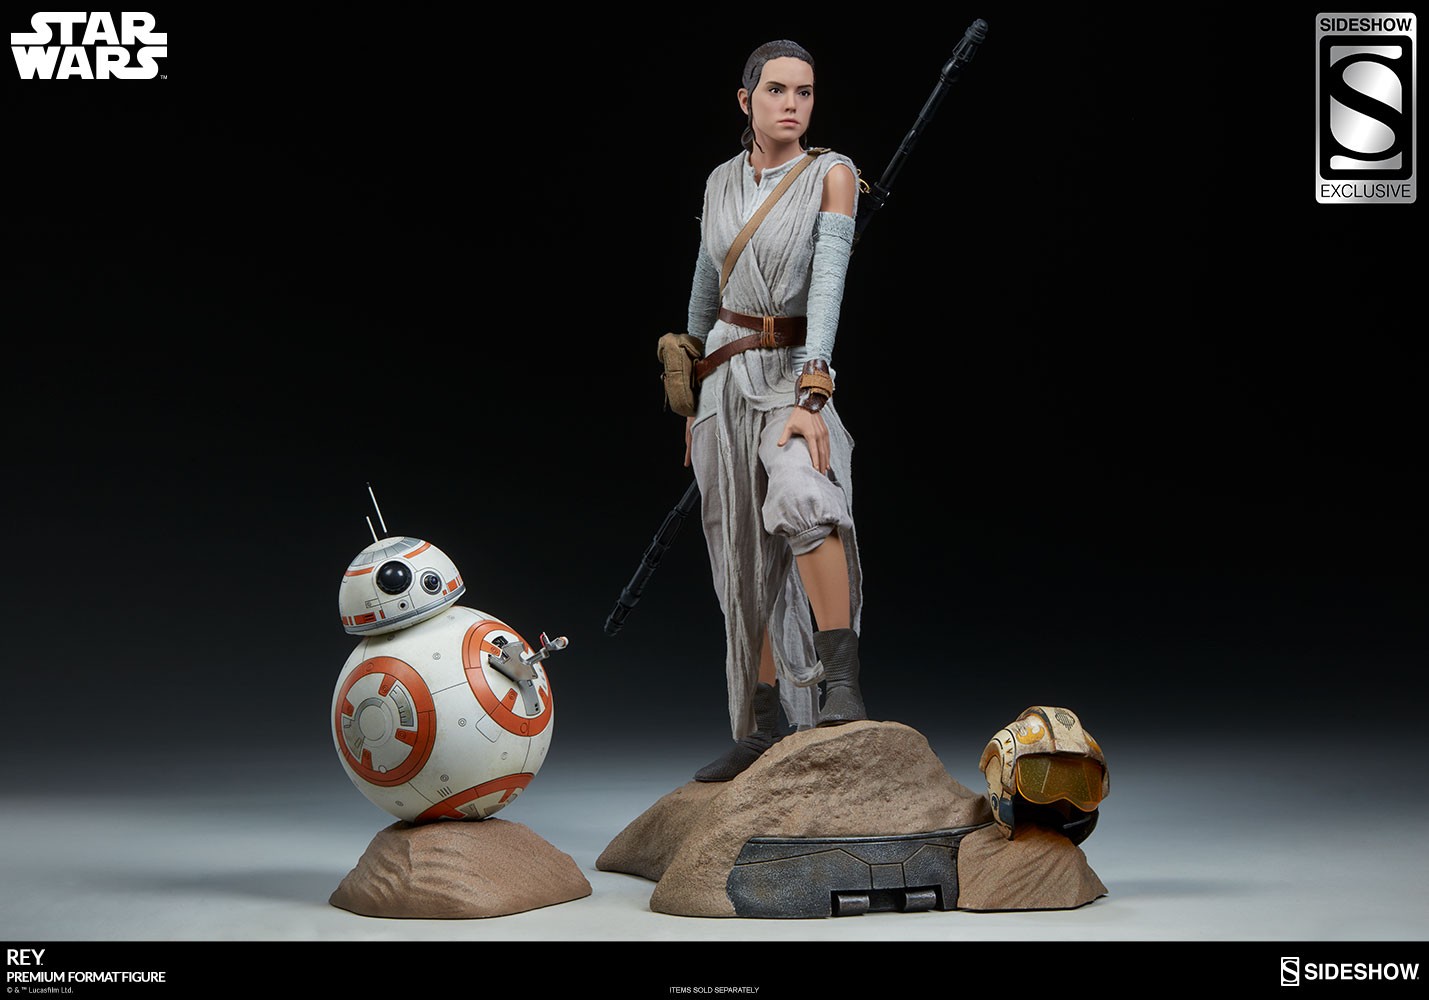 Rey Exclusive Edition View 4